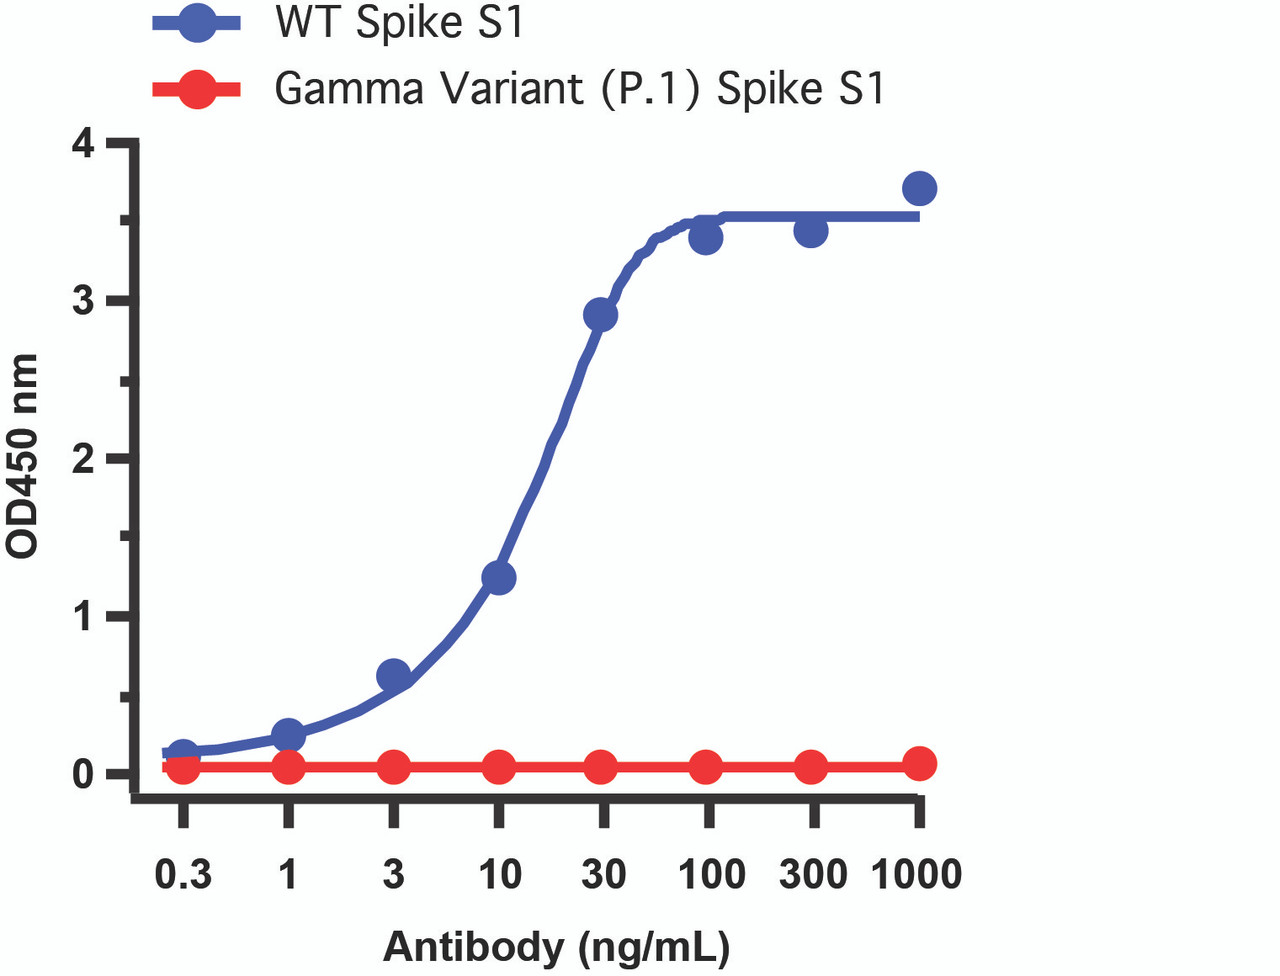 Figure 2 ELISA Validation of Spike 26P Antibodies with SARS-CoV-2 Gamma Variant Spike S1 Protein 
Coating Antigen: SARS-CoV-2 spike S1 proteins of WT and Gamma variant (P.1) , 1 ug/mL, incubate at 4 &#730;C overnight.
Detection Antibodies: SARS-CoV-2 Spike 26P antibody, PM-9583, dilution: 0.3-1000 ng/mL, incubated at RT for 1 hr.
Secondary Antibodies: Goat anti-mouse HRP at 1:5, 000, incubated at RT for 1 hr.
SARS-CoV-2 Spike 26P antibody detects WT spike S1 protein (10-300) , but not Gamma variant spike S1 protein. </strong>